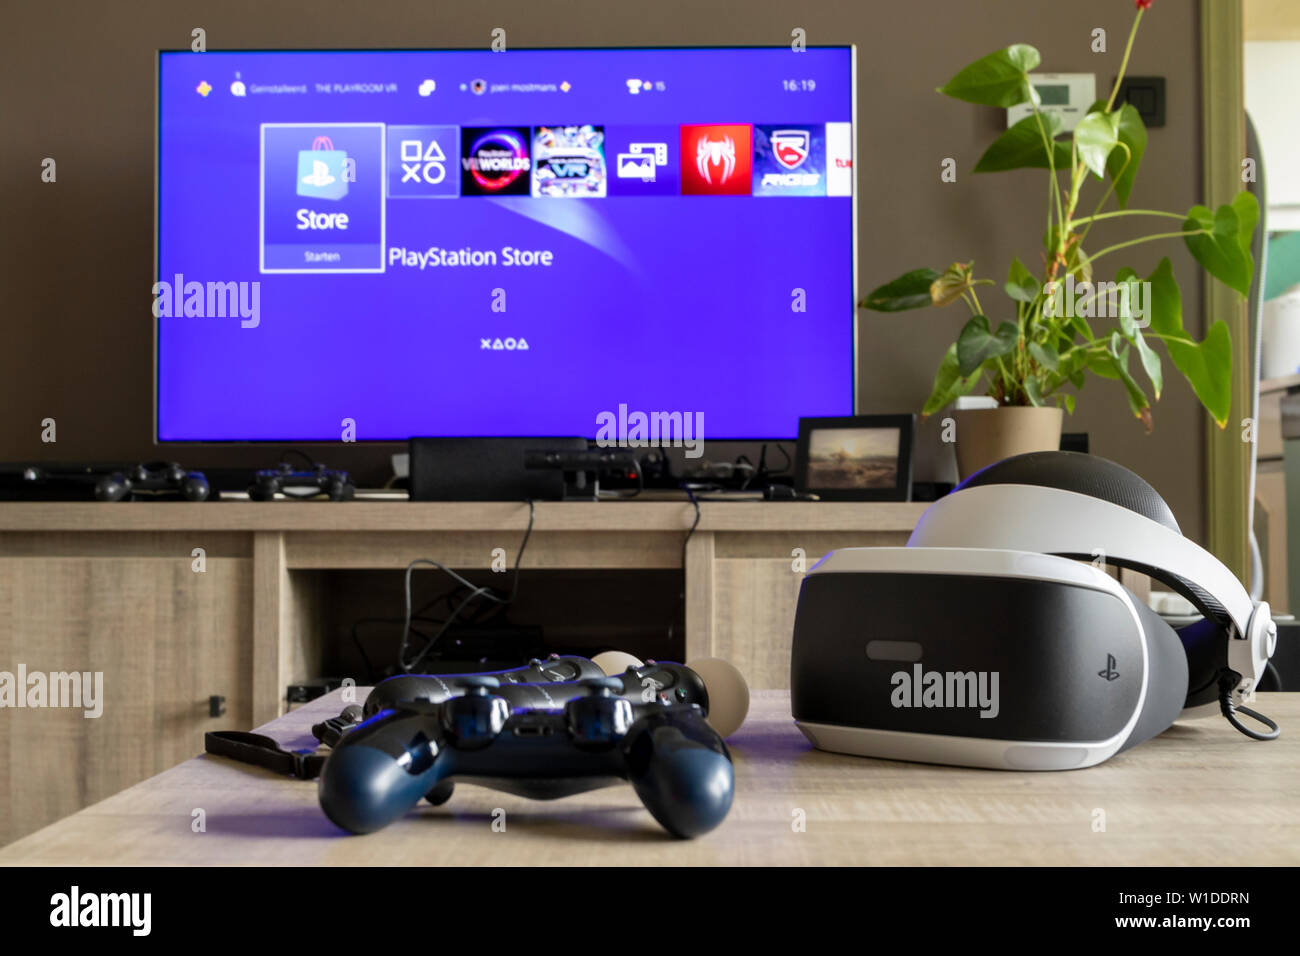 A Playstation Vr Headset On A Wooden Table Together With A Ps4 Controller And Some Playstation Move Controllers In The Background There Is A Tv Stock Photo Alamy